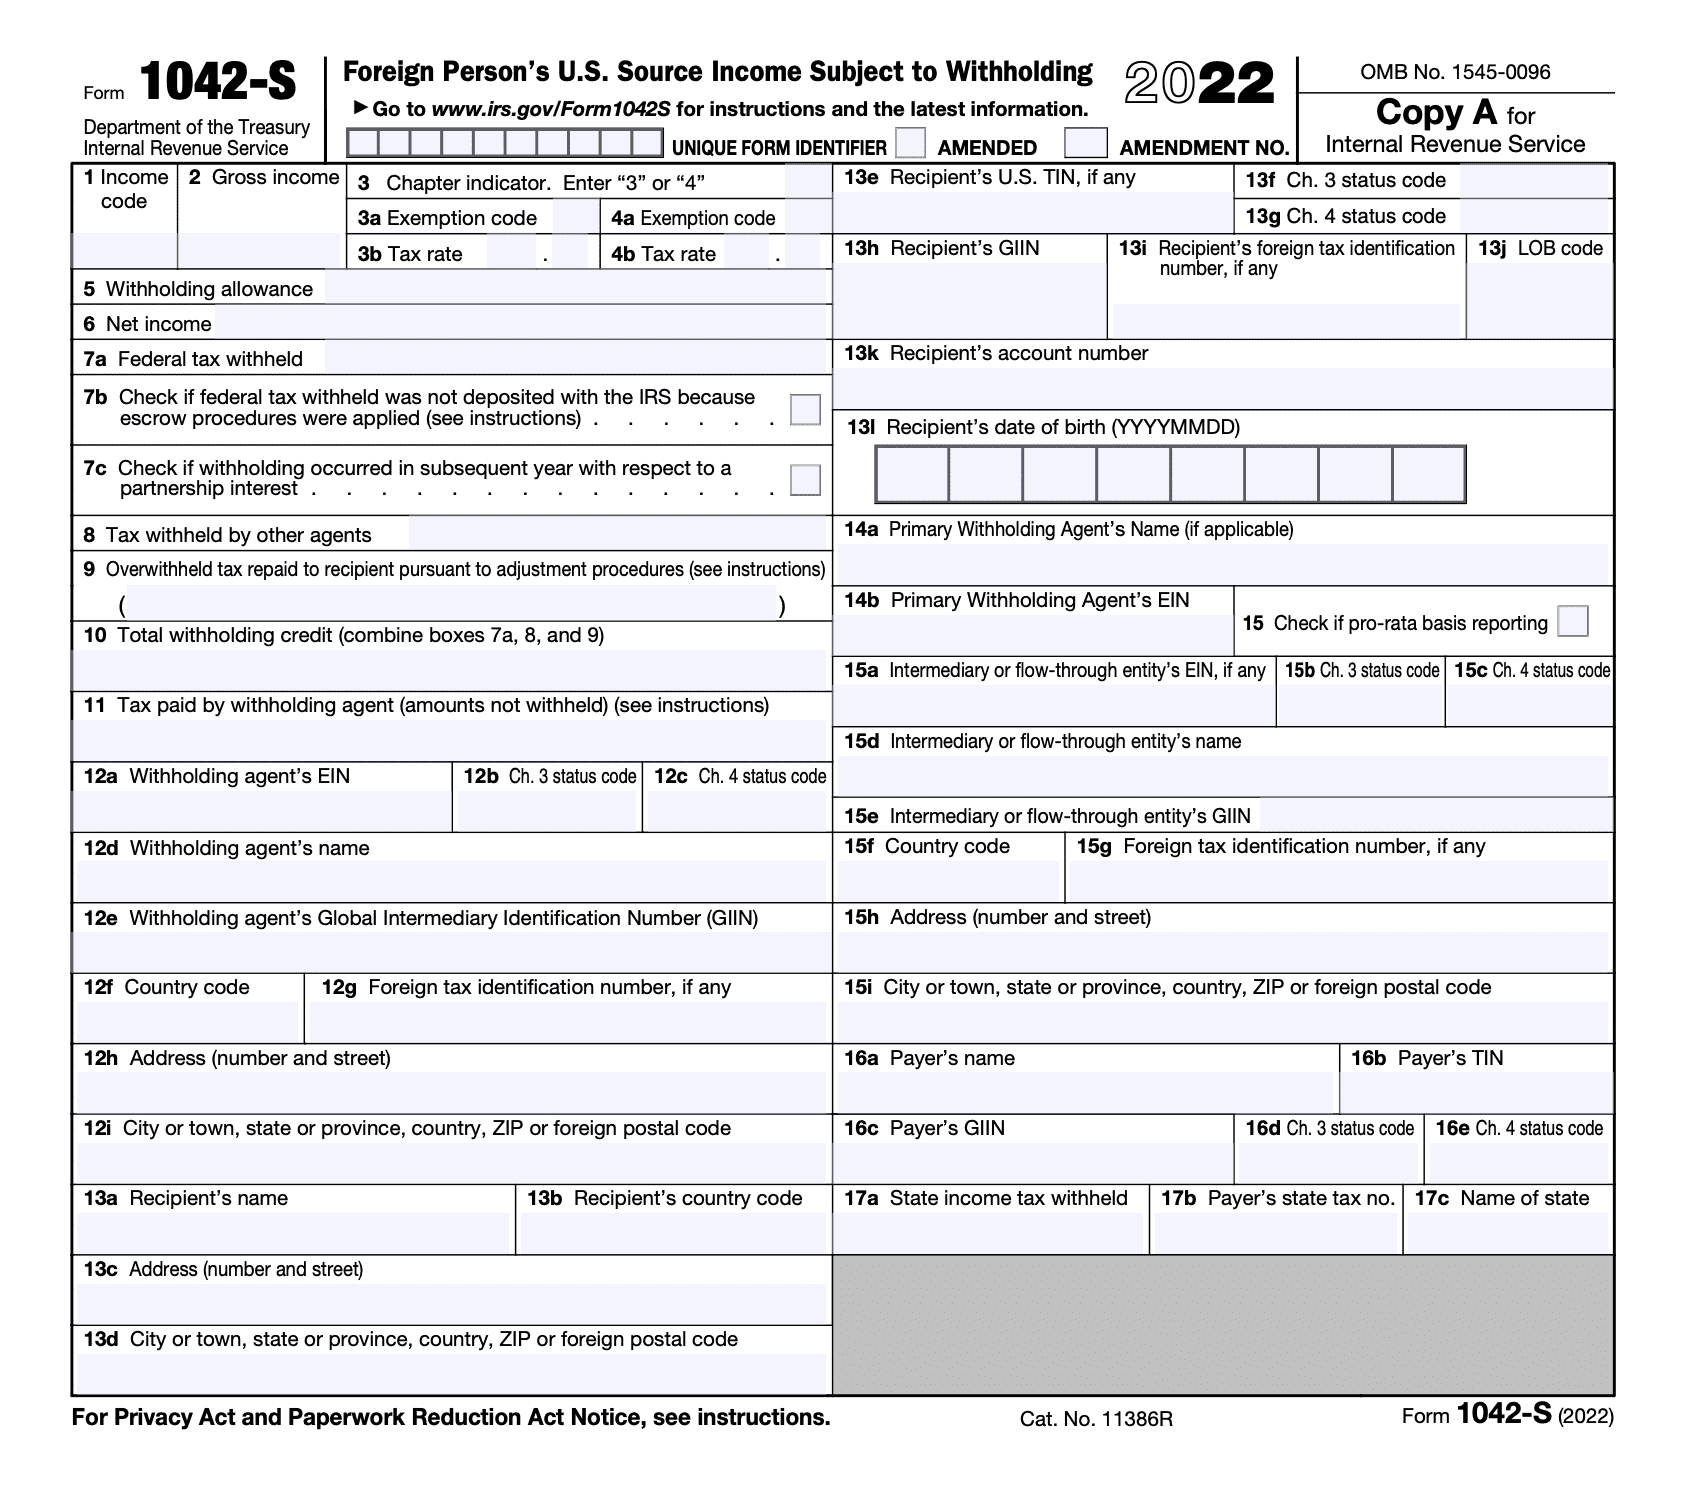 Screen capture of IRS Form 1042-S